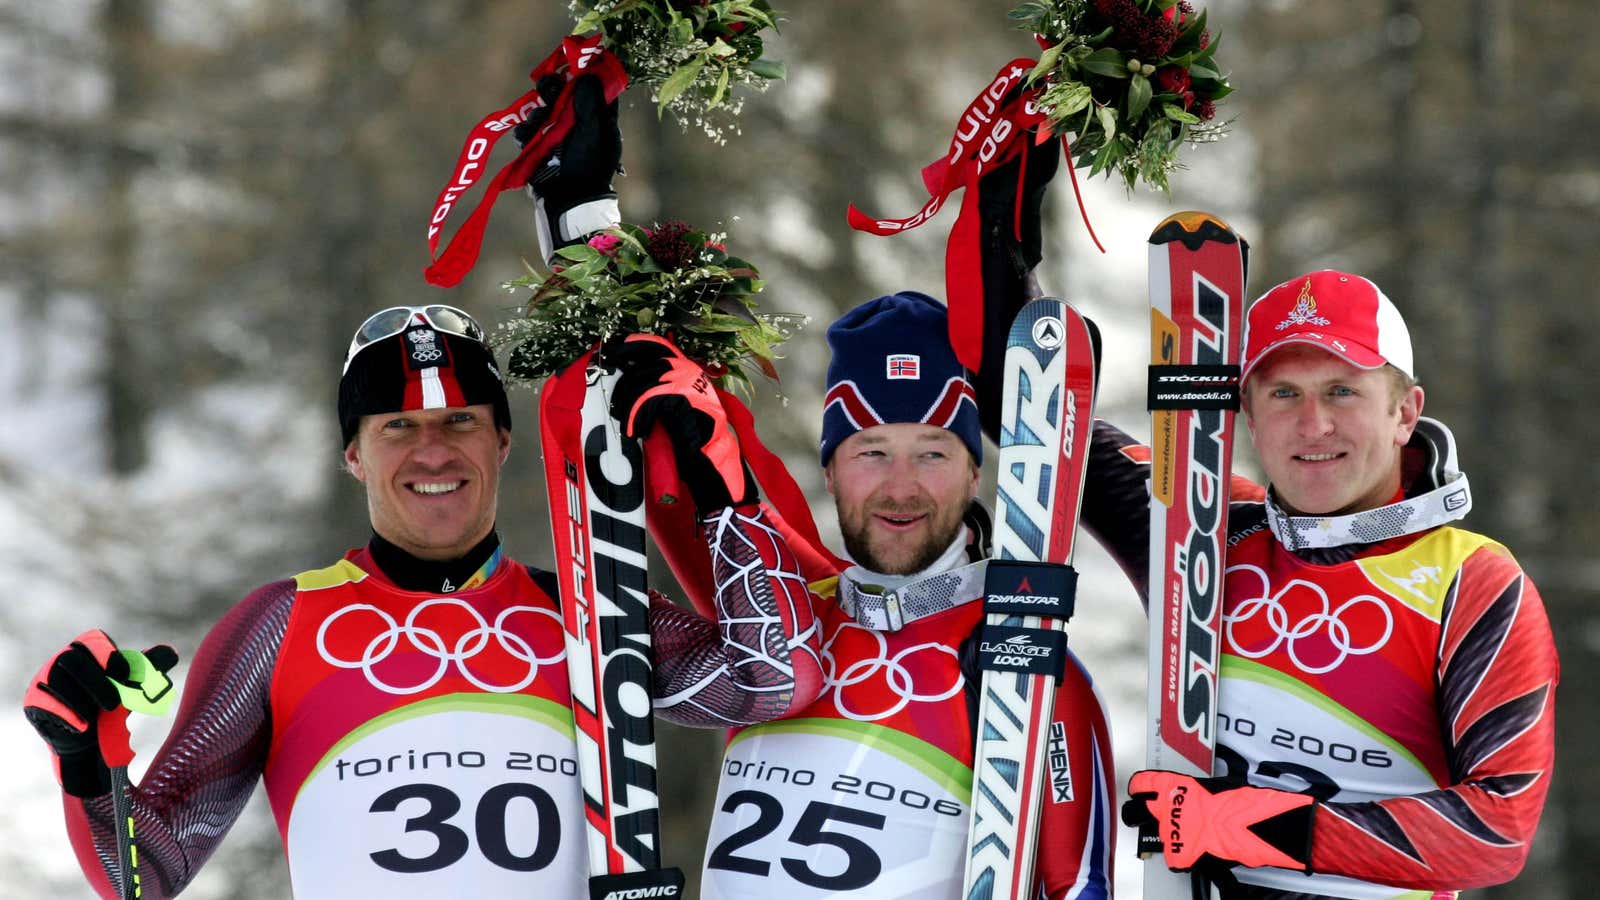 Kjetil Andre Aamodt (center) and Ambrosi Hoffmann (right), both from Switzerland, and Hermann Maier of Austria after the men’s Alpine skiing super-G at the 2006 Torino Winter Olympics.